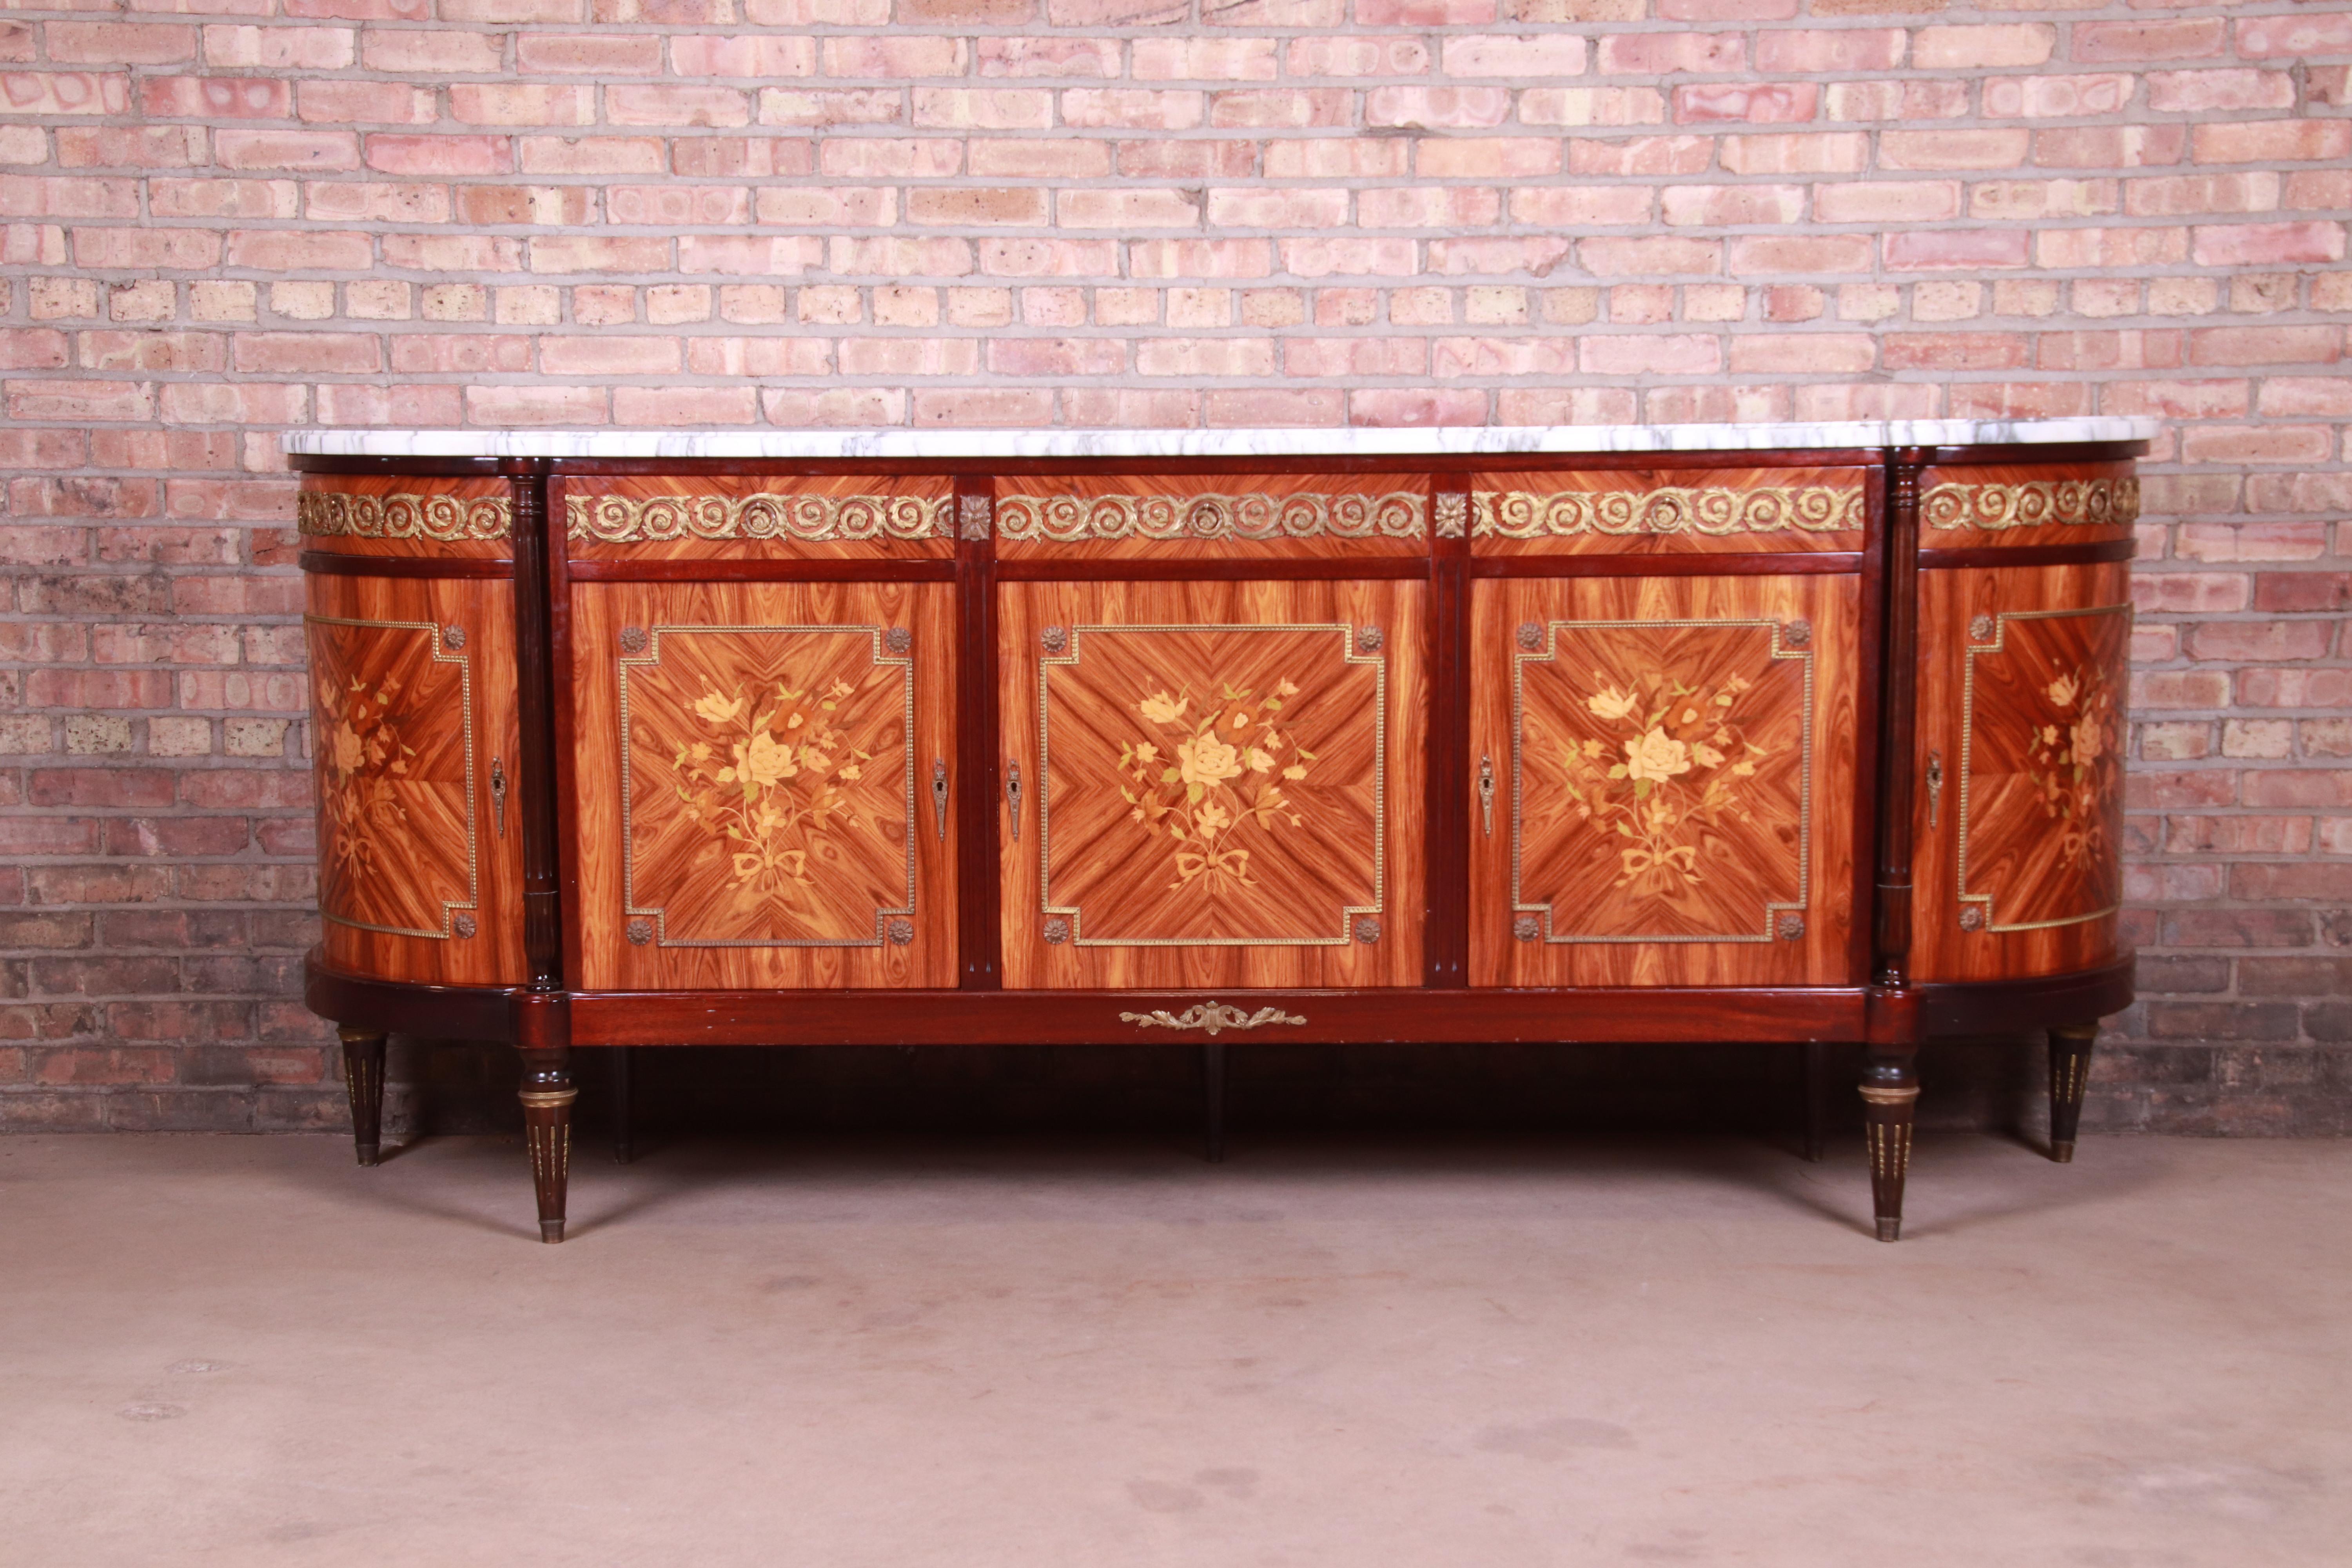 An exceptional French Louis XVI or Directoire style sideboard, credenza, or bar cabinet

By N.F. Ameublement

France, mid-20th century

Kingwood, with inlaid satinwood floral marquetry, bronze ormolu mounts, and Carrara marble